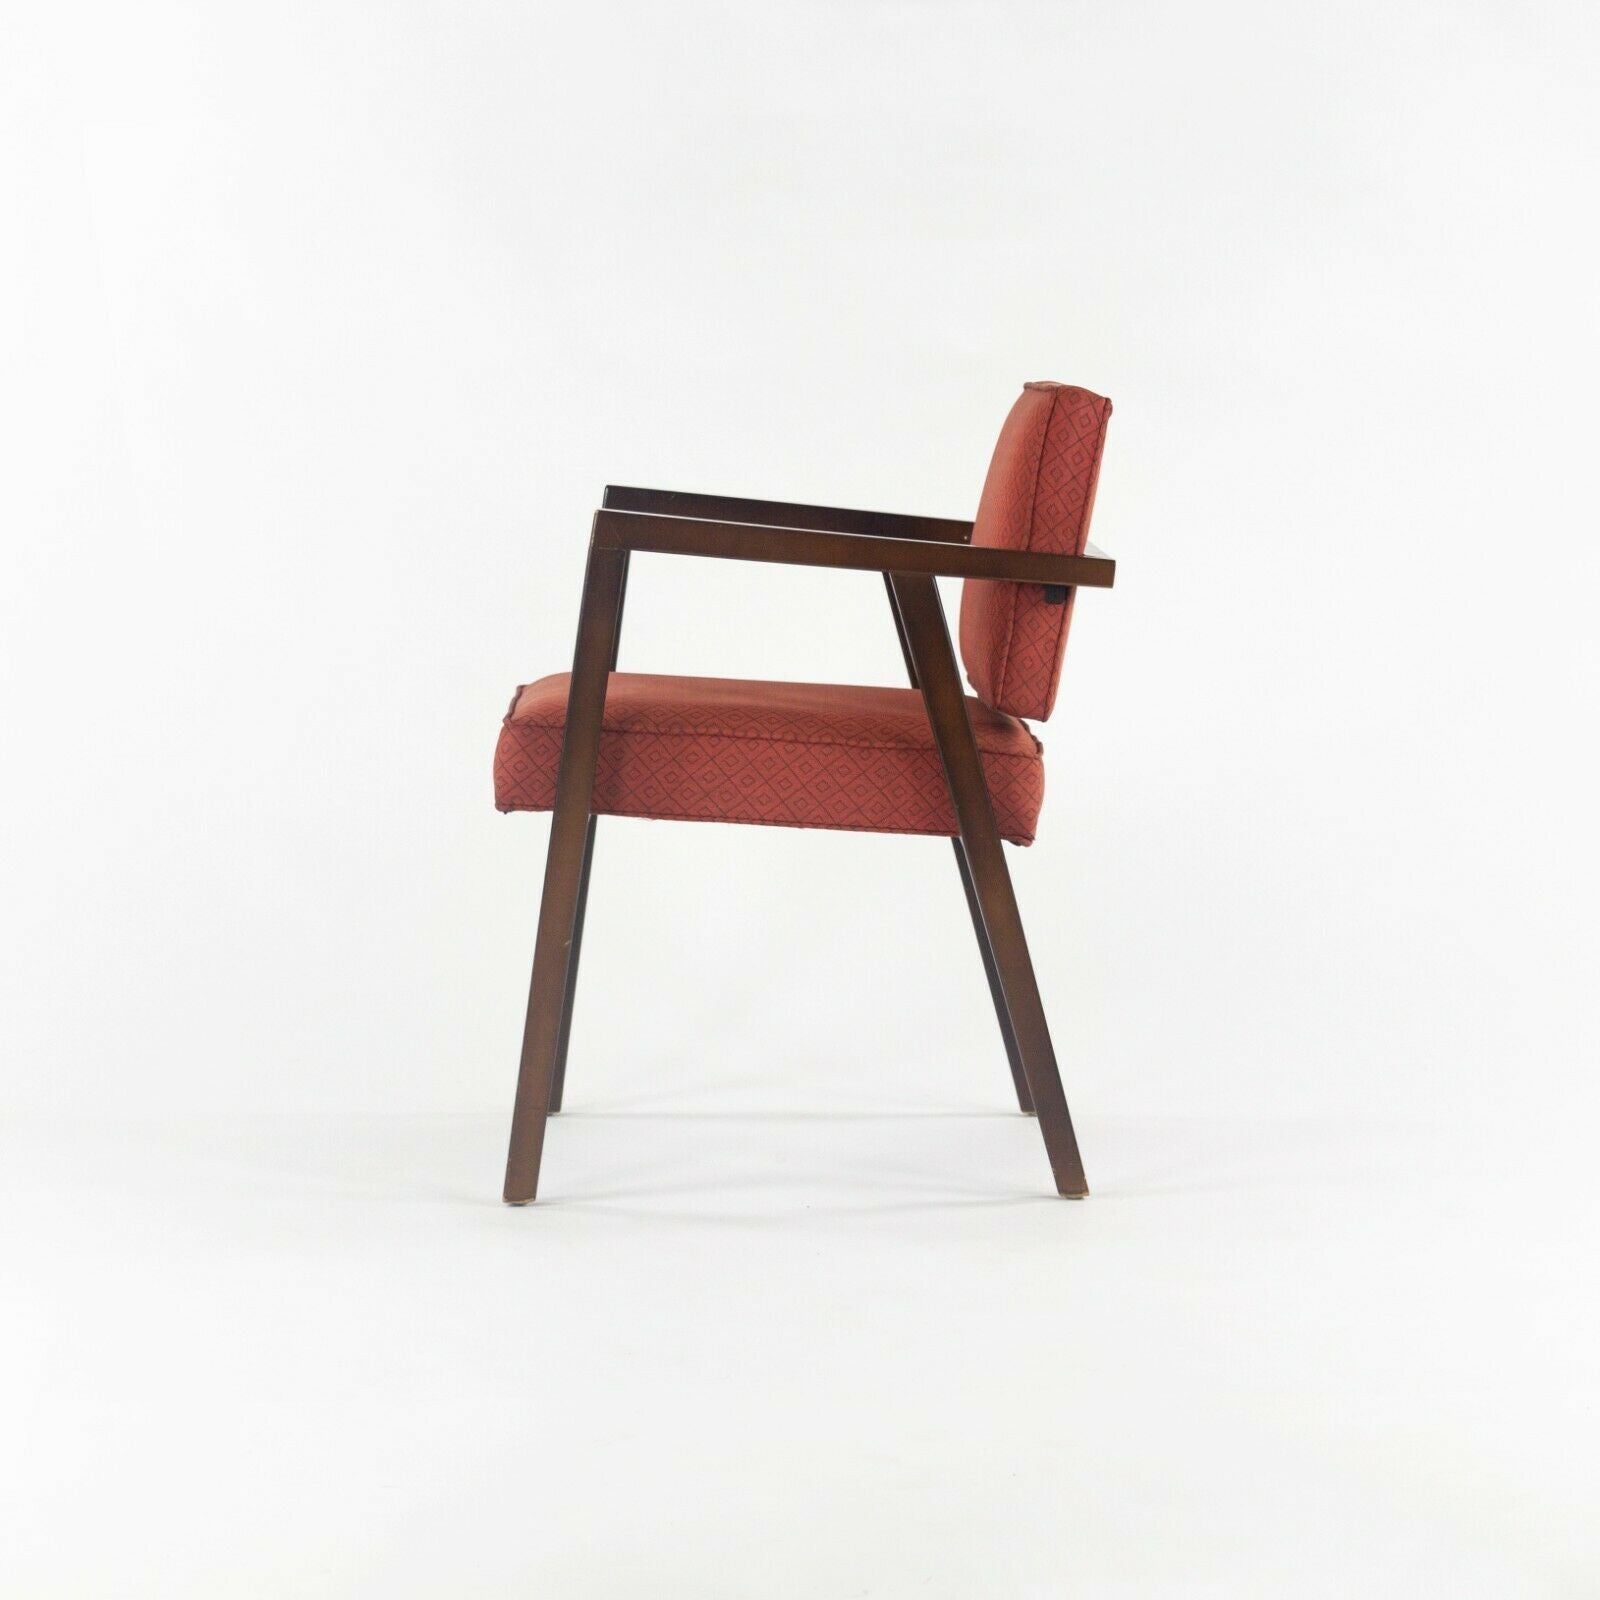 No. 48 Chair